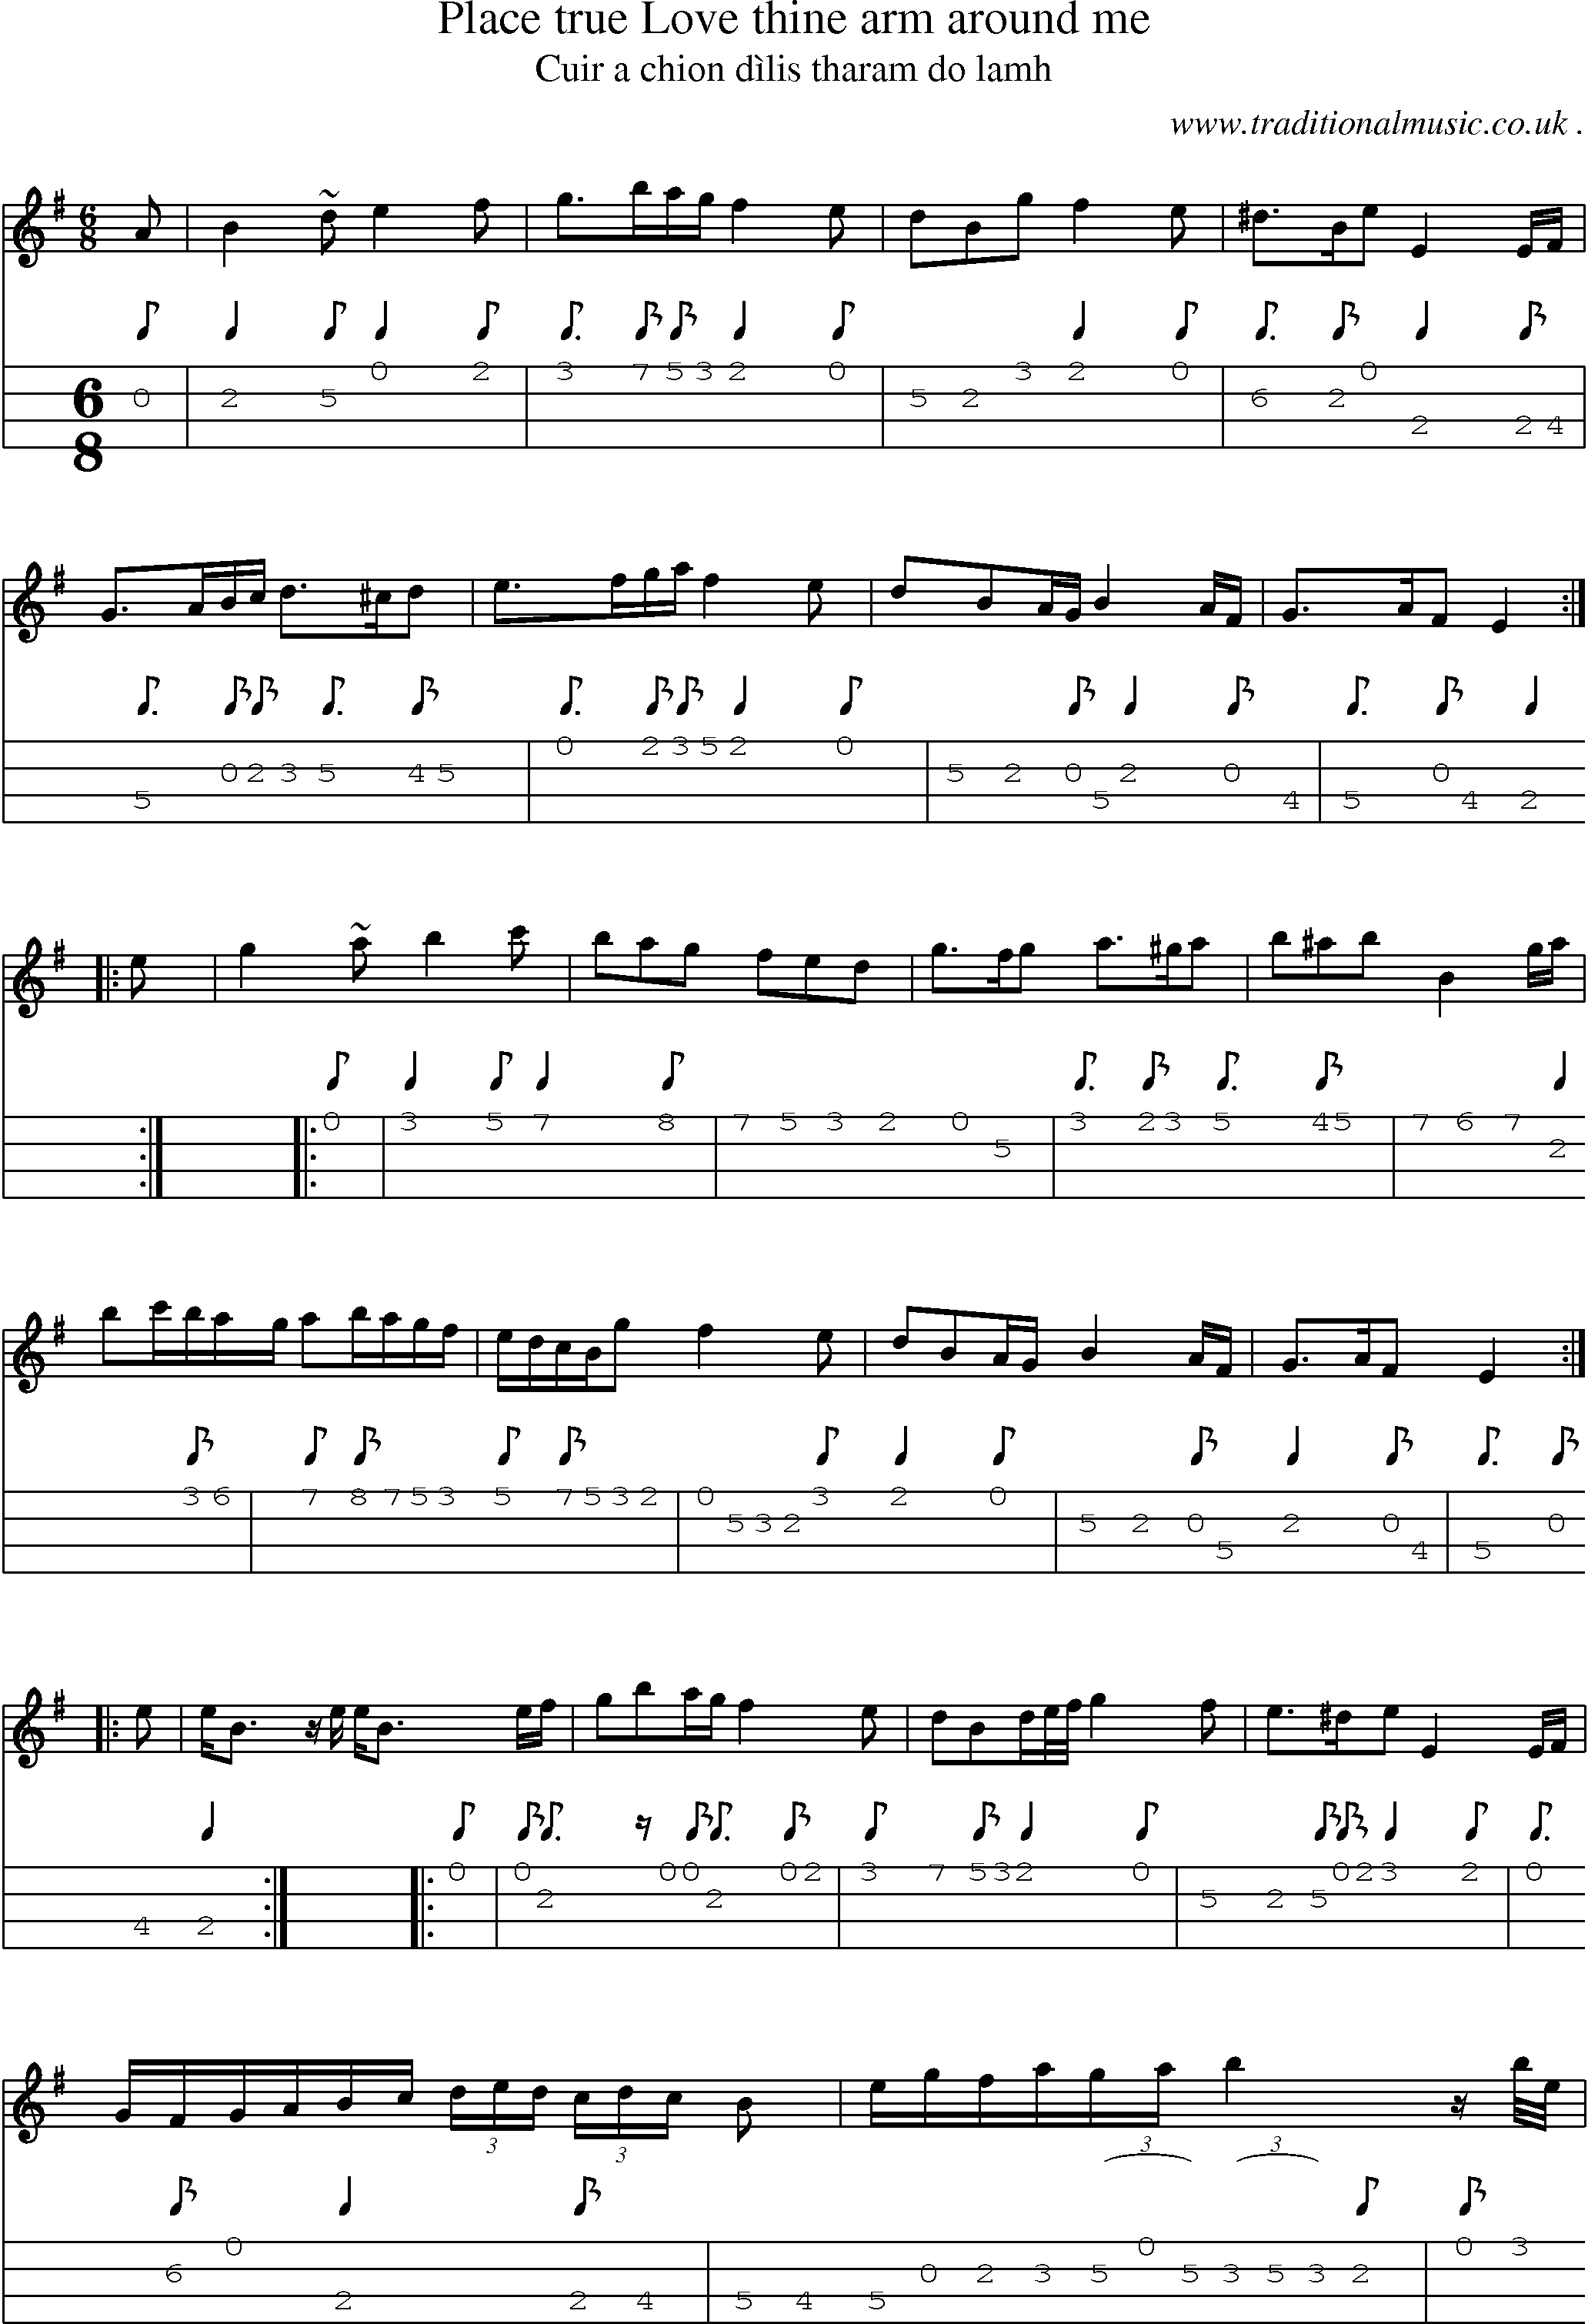 Sheet-music  score, Chords and Mandolin Tabs for Place True Love Thine Arm Around Me